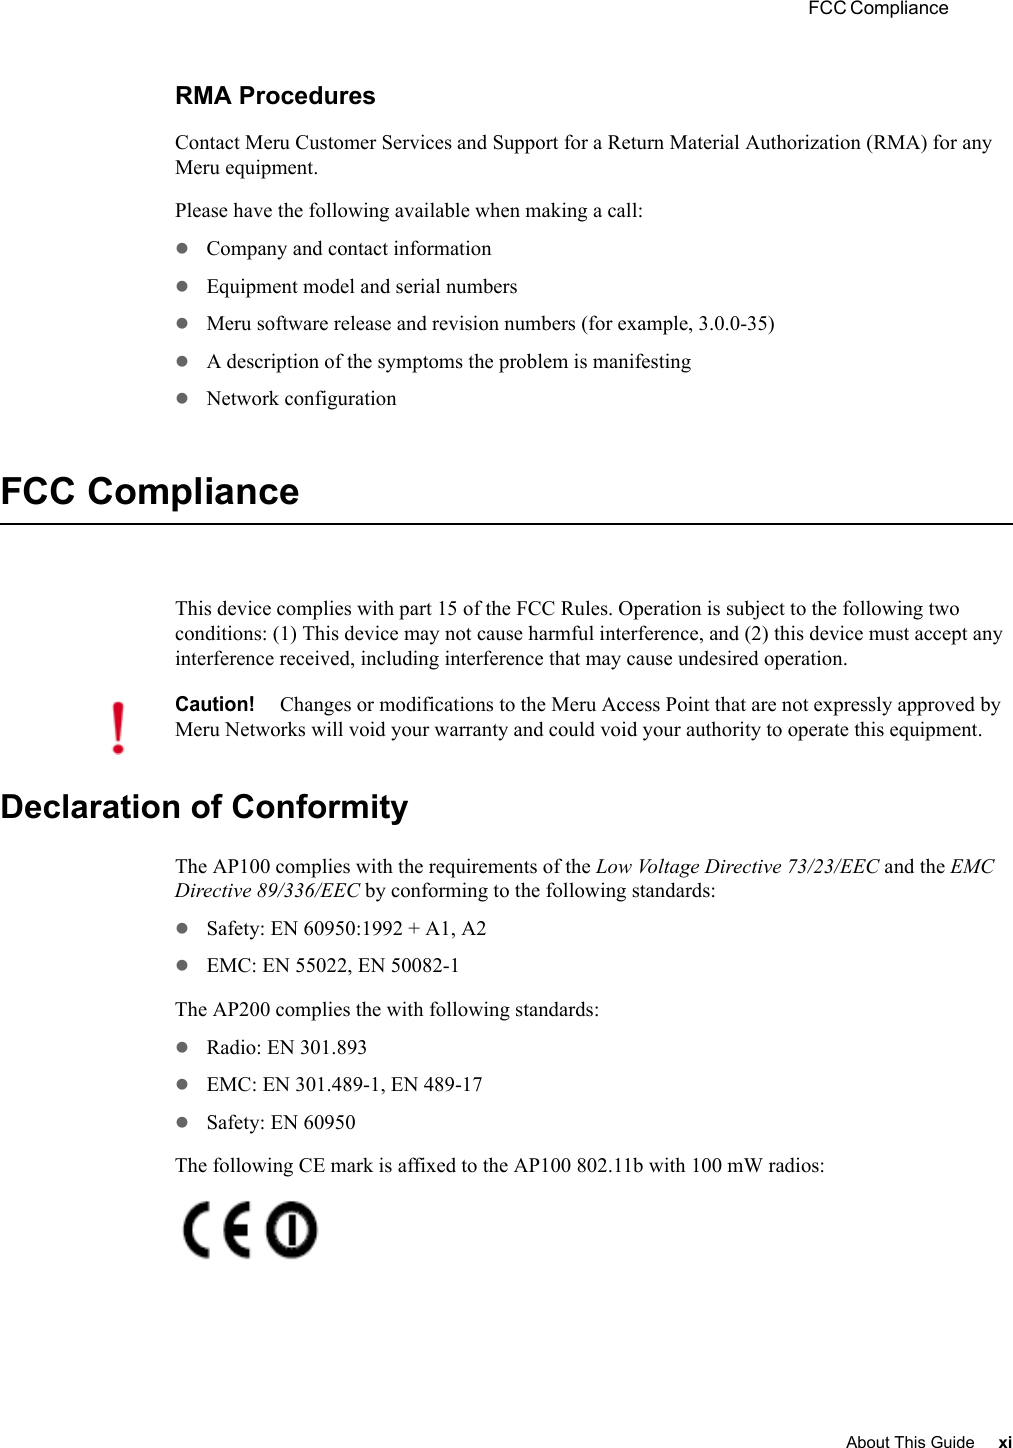  FCC Compliance About This Guide xi RMA ProceduresContact Meru Customer Services and Support for a Return Material Authorization (RMA) for any Meru equipment.Please have the following available when making a call:zCompany and contact informationzEquipment model and serial numberszMeru software release and revision numbers (for example, 3.0.0-35)zA description of the symptoms the problem is manifestingzNetwork configurationFCC ComplianceThis device complies with part 15 of the FCC Rules. Operation is subject to the following two conditions: (1) This device may not cause harmful interference, and (2) this device must accept any interference received, including interference that may cause undesired operation.Declaration of ConformityThe AP100 complies with the requirements of the Low Voltage Directive 73/23/EEC and the EMC Directive 89/336/EEC by conforming to the following standards:zSafety: EN 60950:1992 + A1, A2zEMC: EN 55022, EN 50082-1The AP200 complies the with following standards:zRadio: EN 301.893zEMC: EN 301.489-1, EN 489-17zSafety: EN 60950The following CE mark is affixed to the AP100 802.11b with 100 mW radios:Caution!Changes or modifications to the Meru Access Point that are not expressly approved by Meru Networks will void your warranty and could void your authority to operate this equipment.